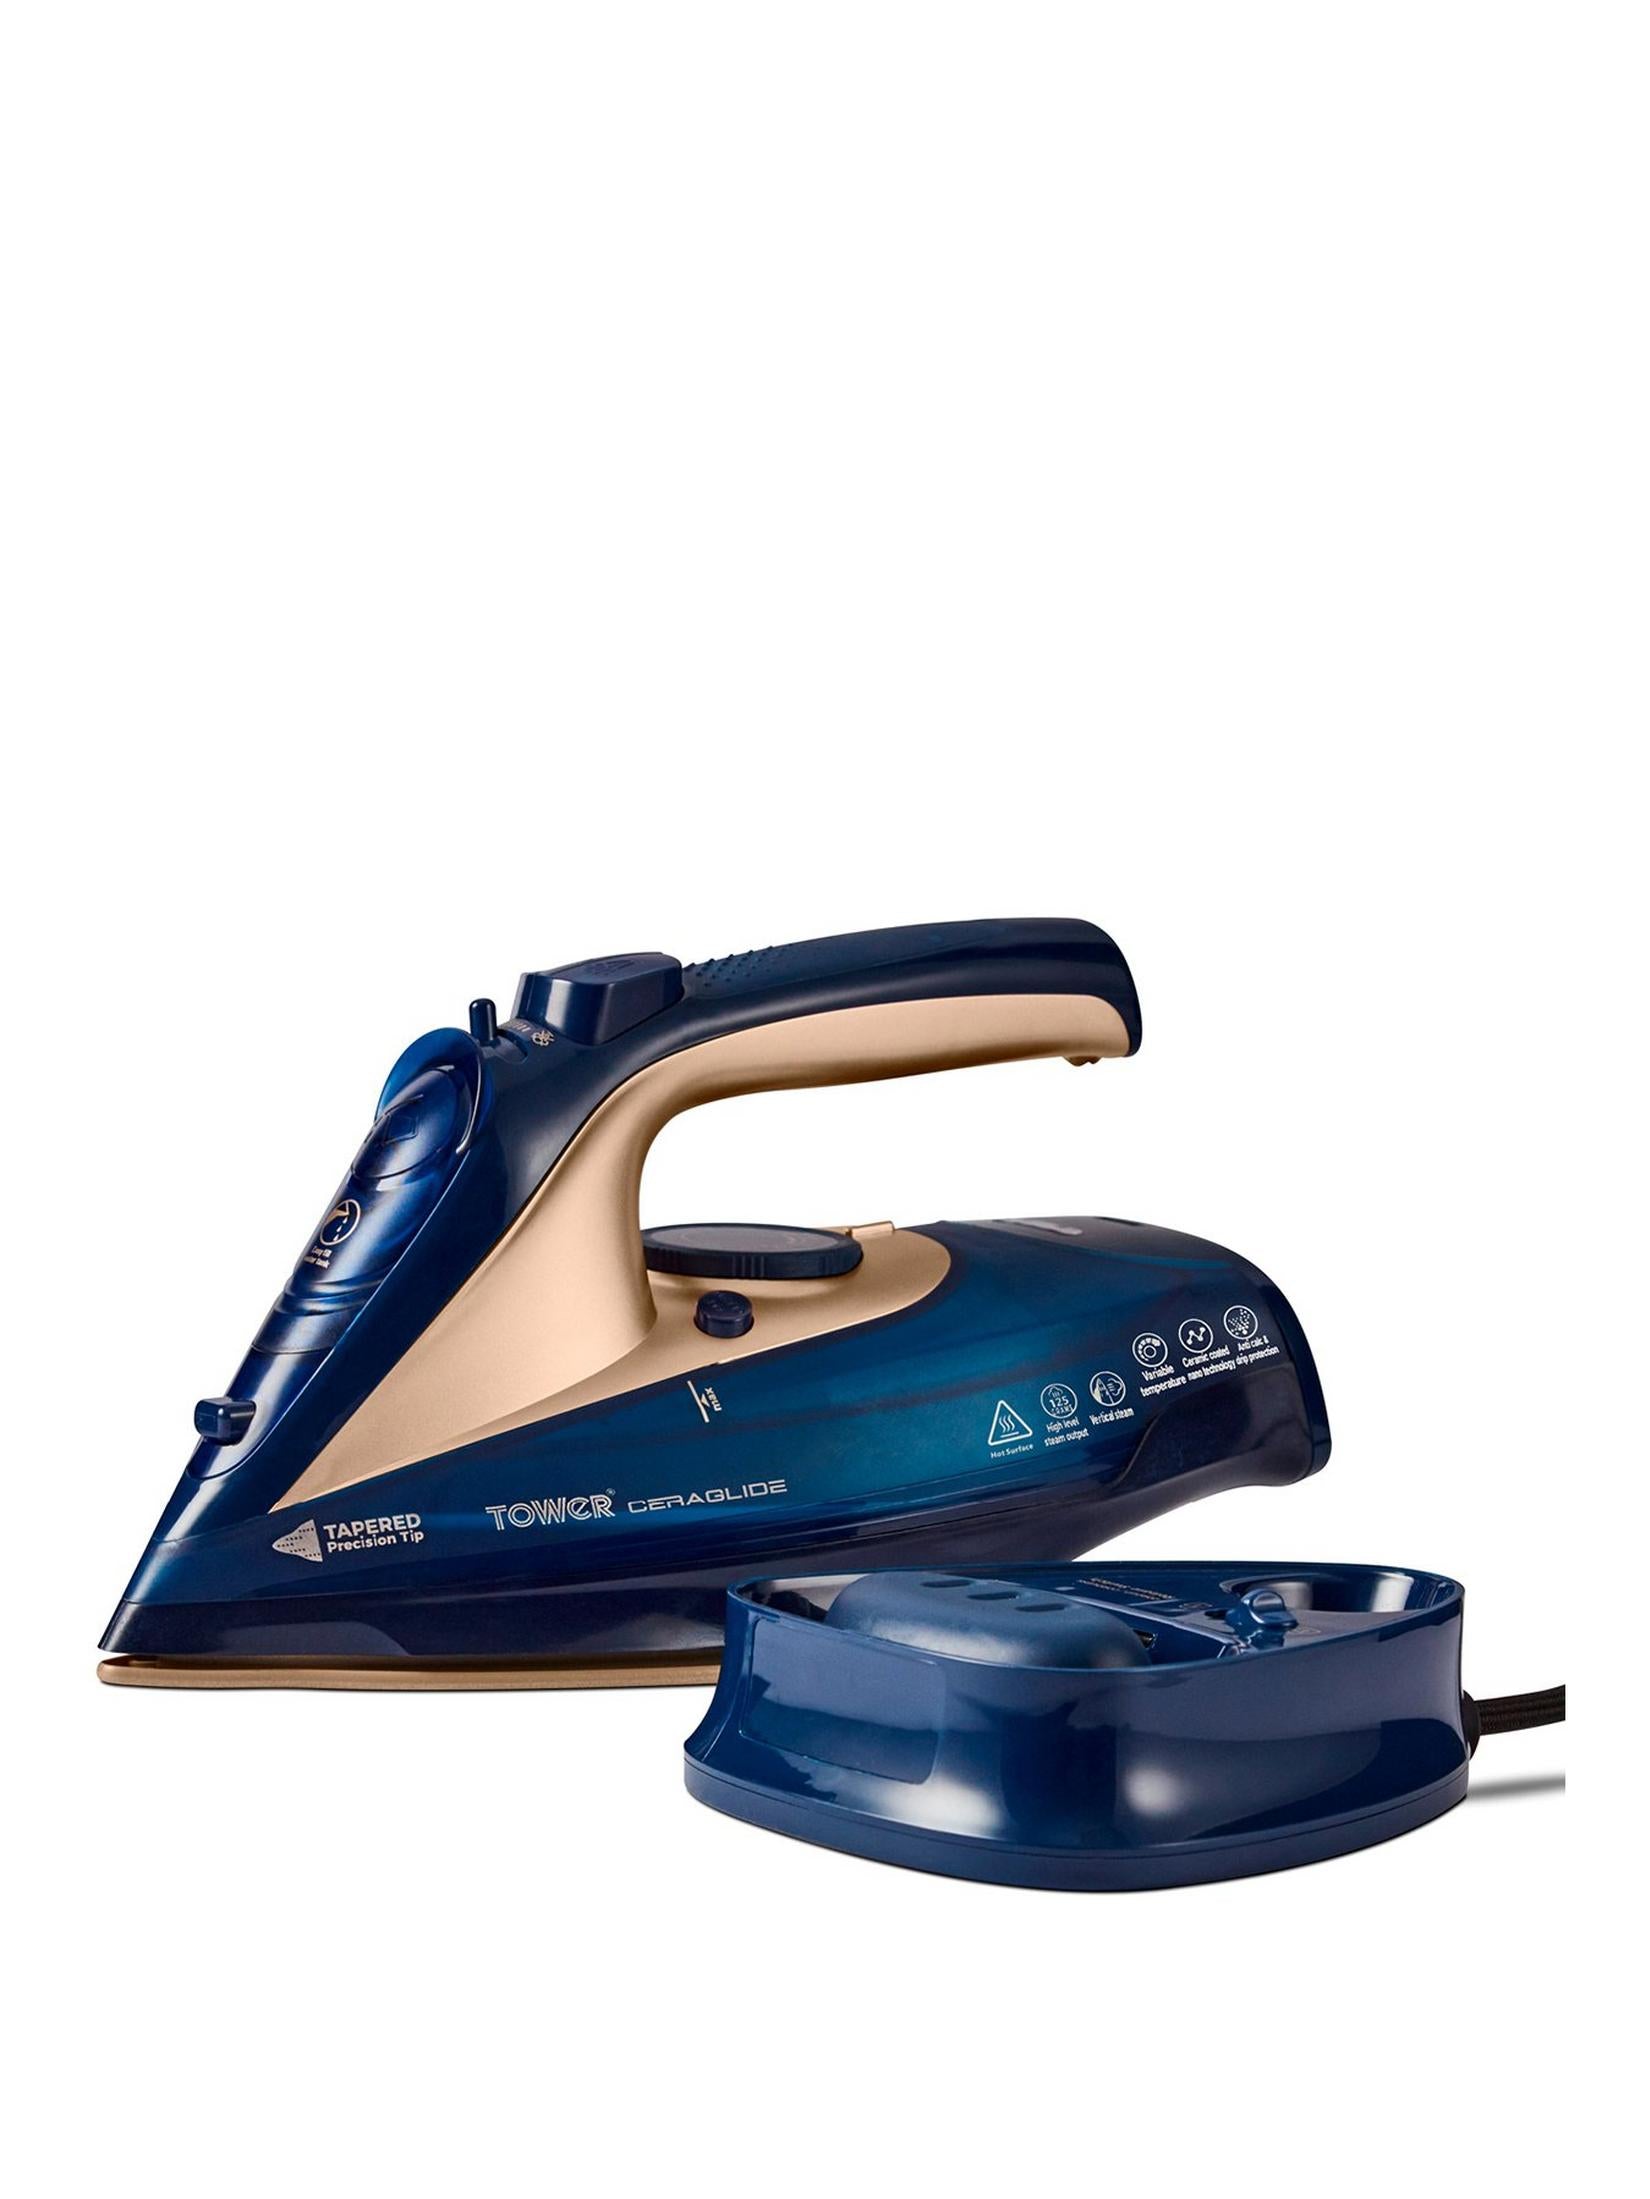 Tower Ceraliglide 2in1 Cordless Steam Iron - Blue/Gold  | TJ Hughes Blue